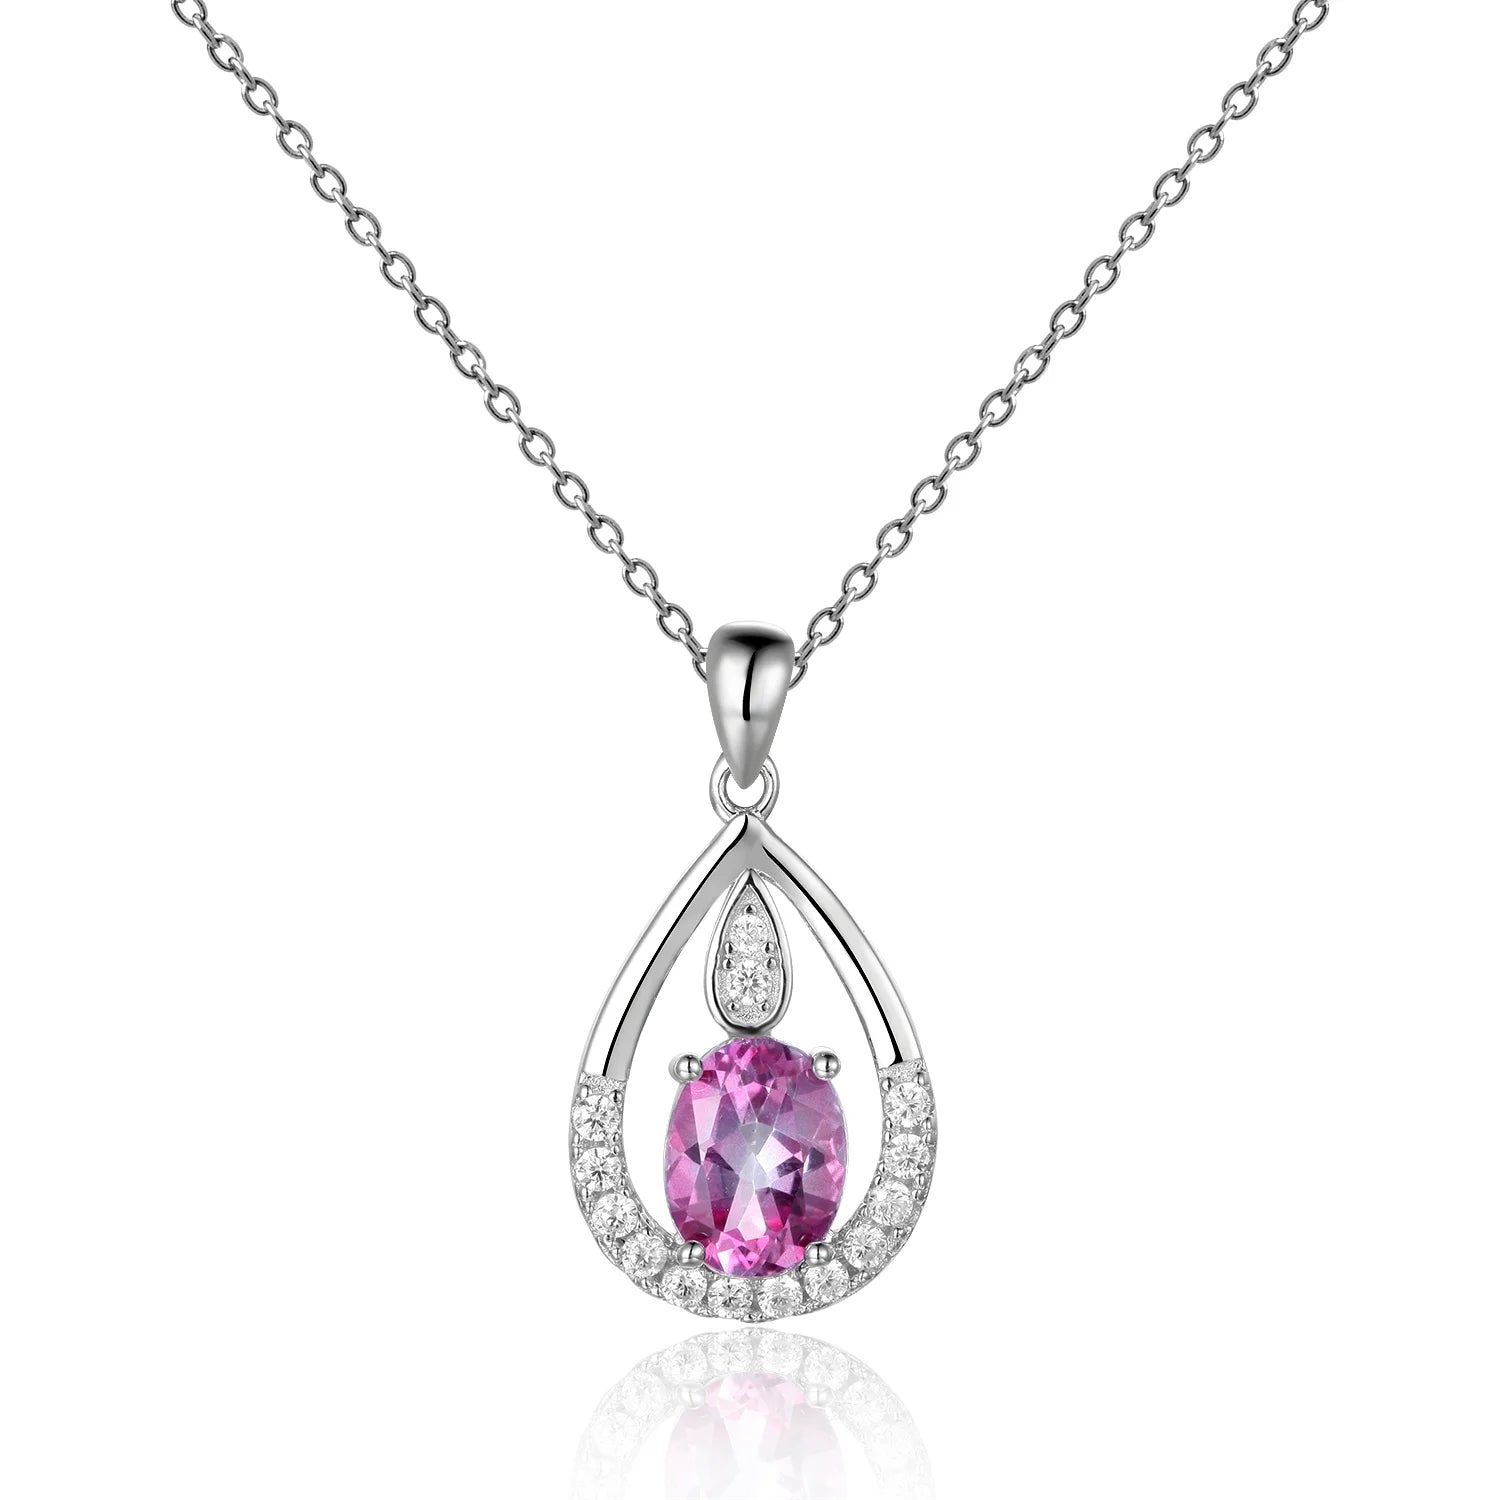 Gem's Ballet December Birthstone Topaz Necklace 6x8mm Oval Pink Topaz Pendant Necklace in 925 Sterling Silver with 18" Chain Pink Topaz